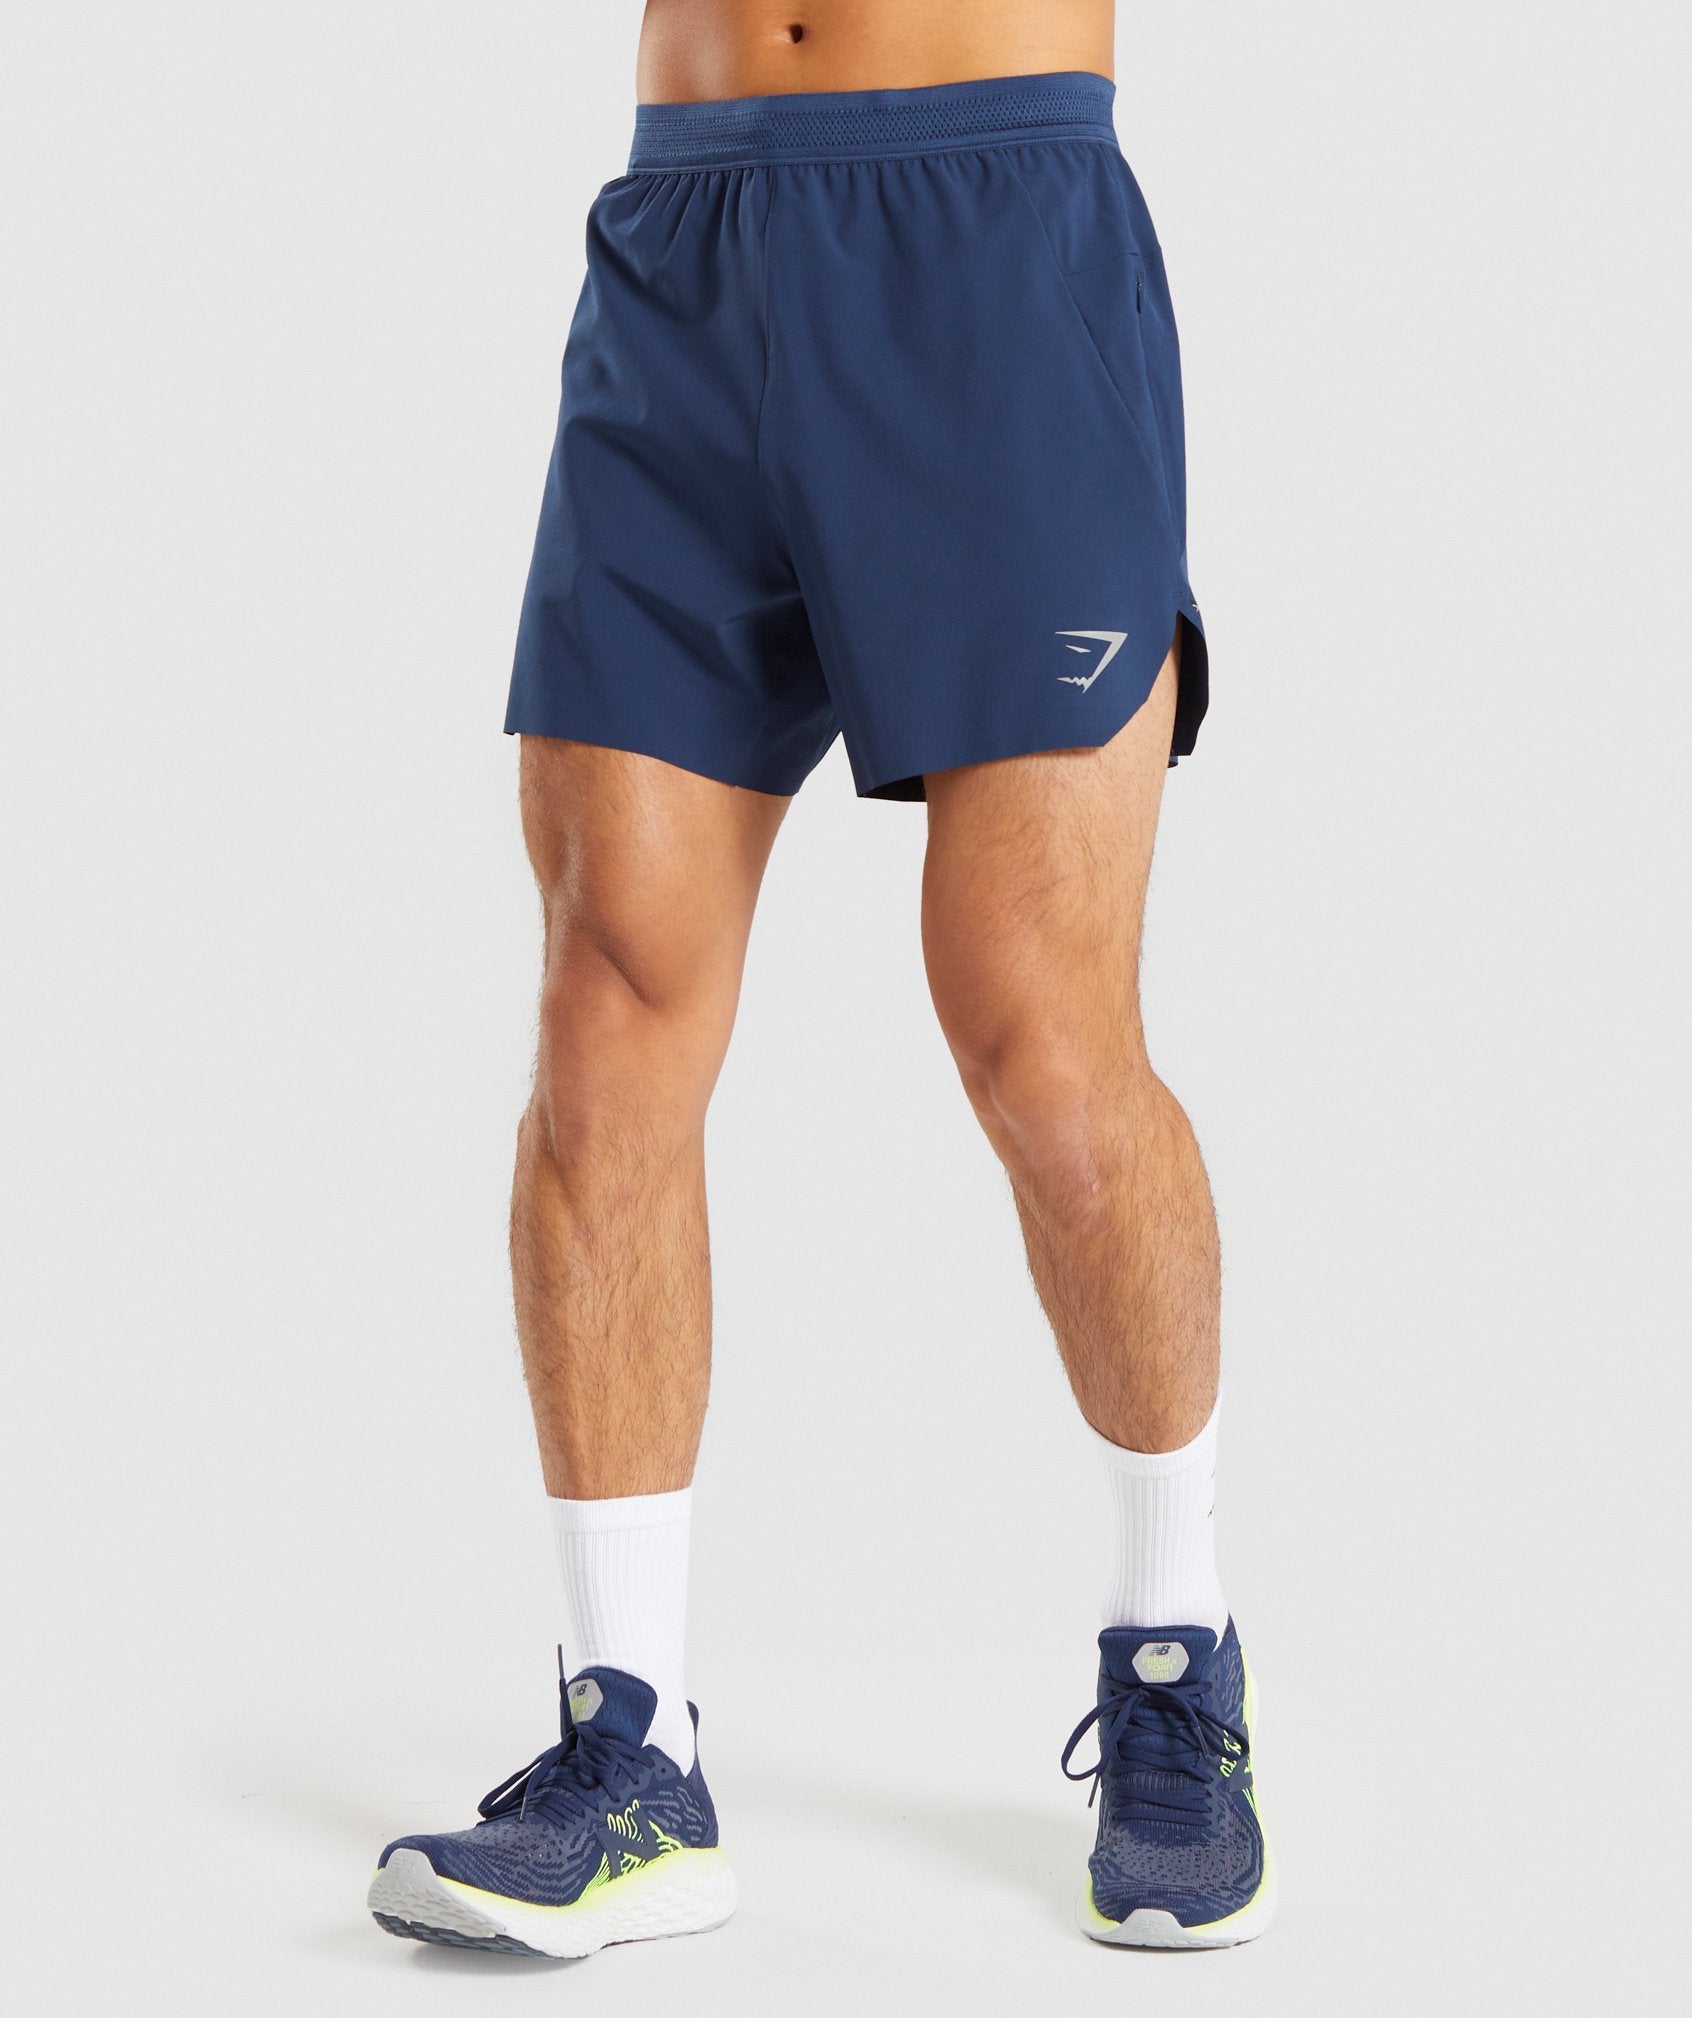 Speed 5" Shorts in Navy - view 1